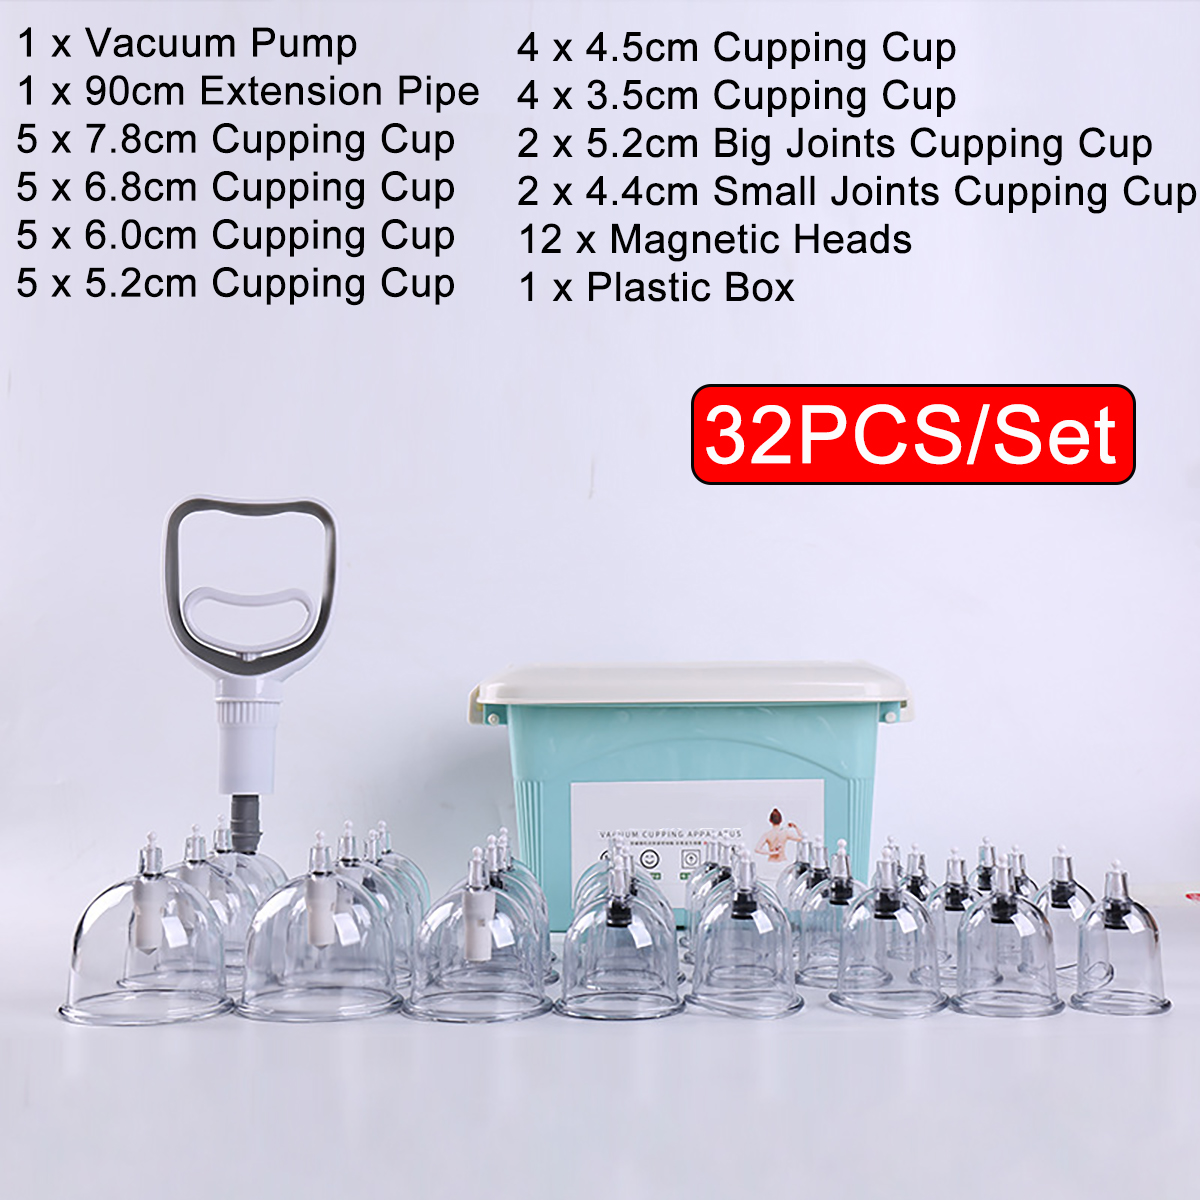 122432pcs-Medical-Chinese-Vacuum-Cupping-Body-Massage-Therapy-Healthy-Suction-Cupping-Massager-1893418-12